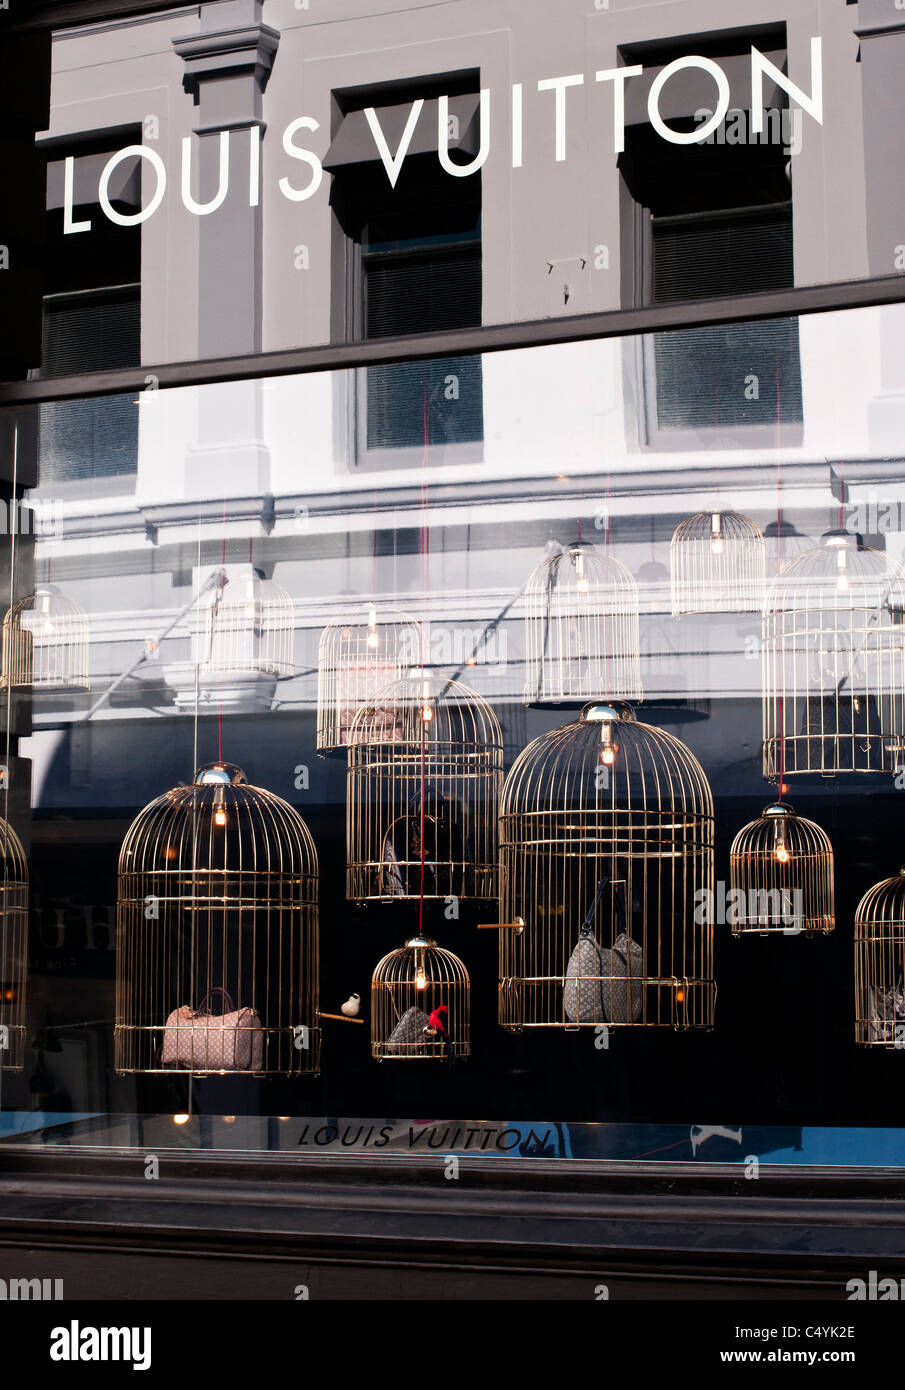 Shop window display of Louis Vuitton bags in gilded cages, King Street, Perth, Western Australia Stock Photo